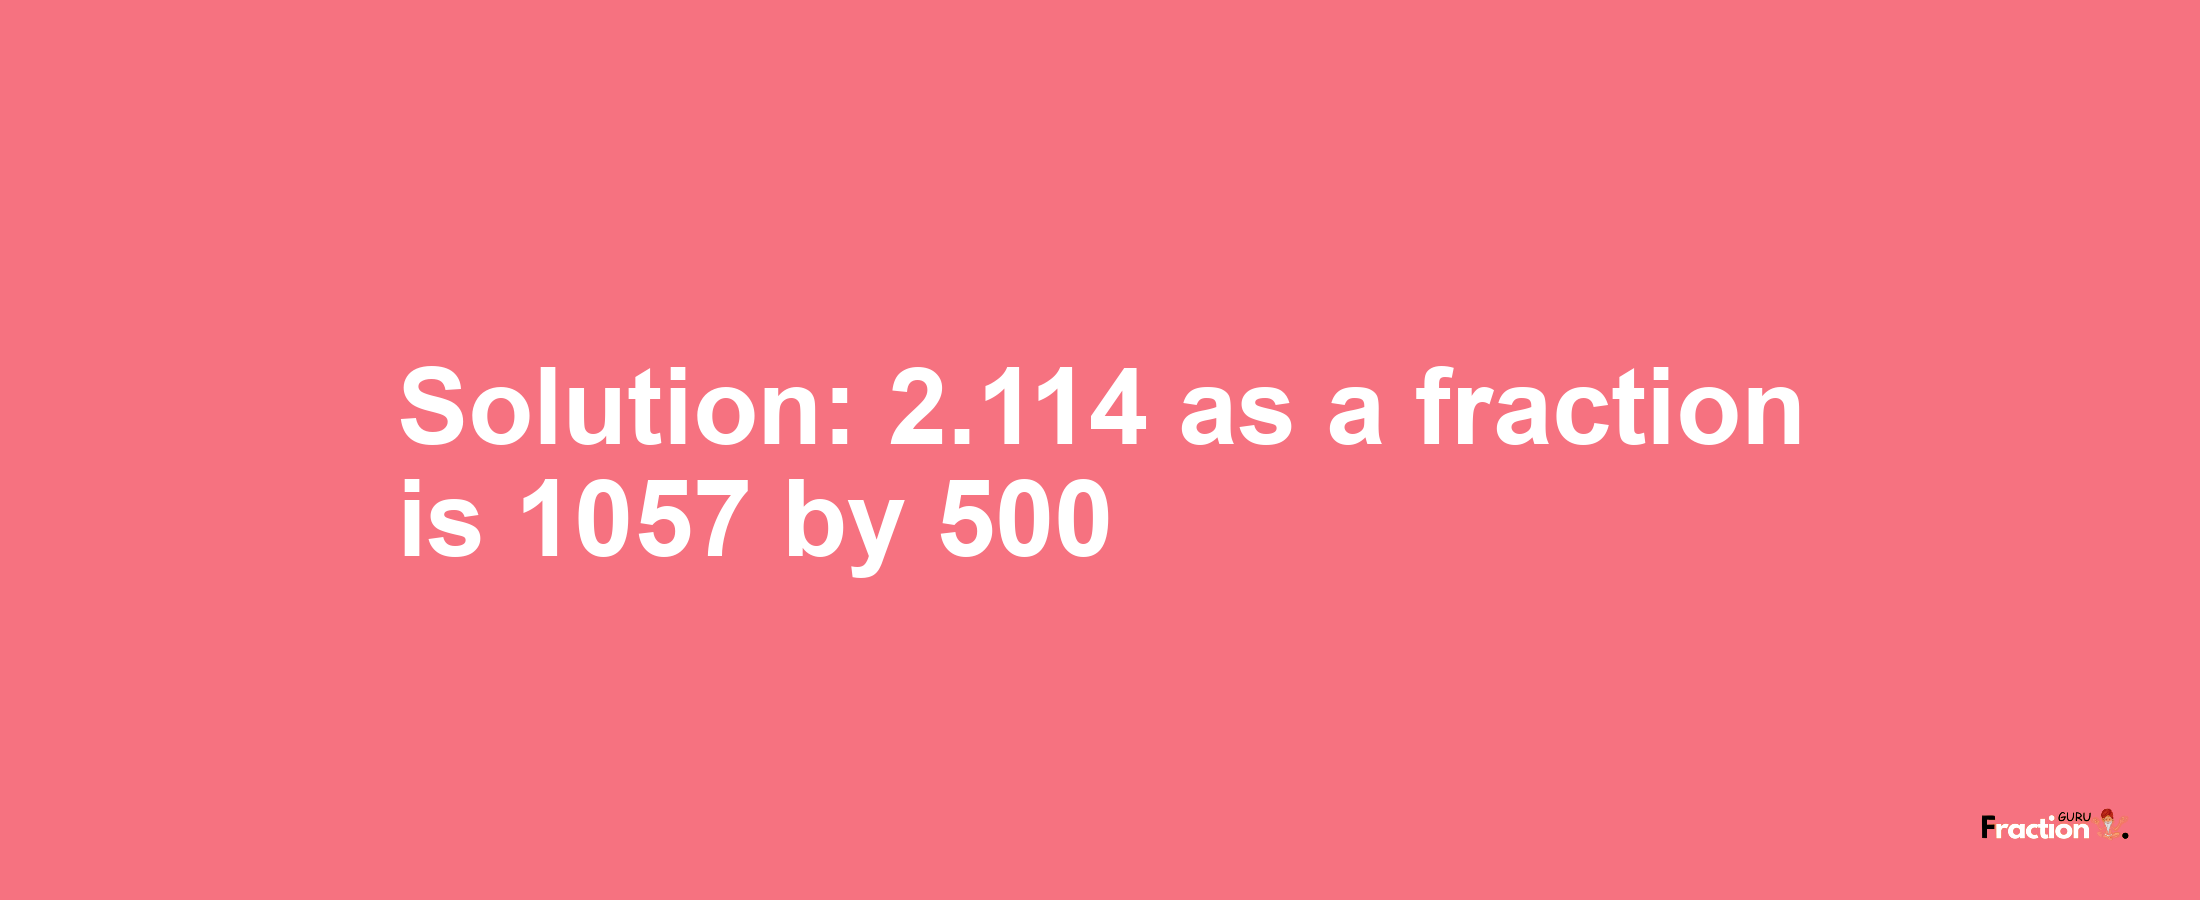 Solution:2.114 as a fraction is 1057/500